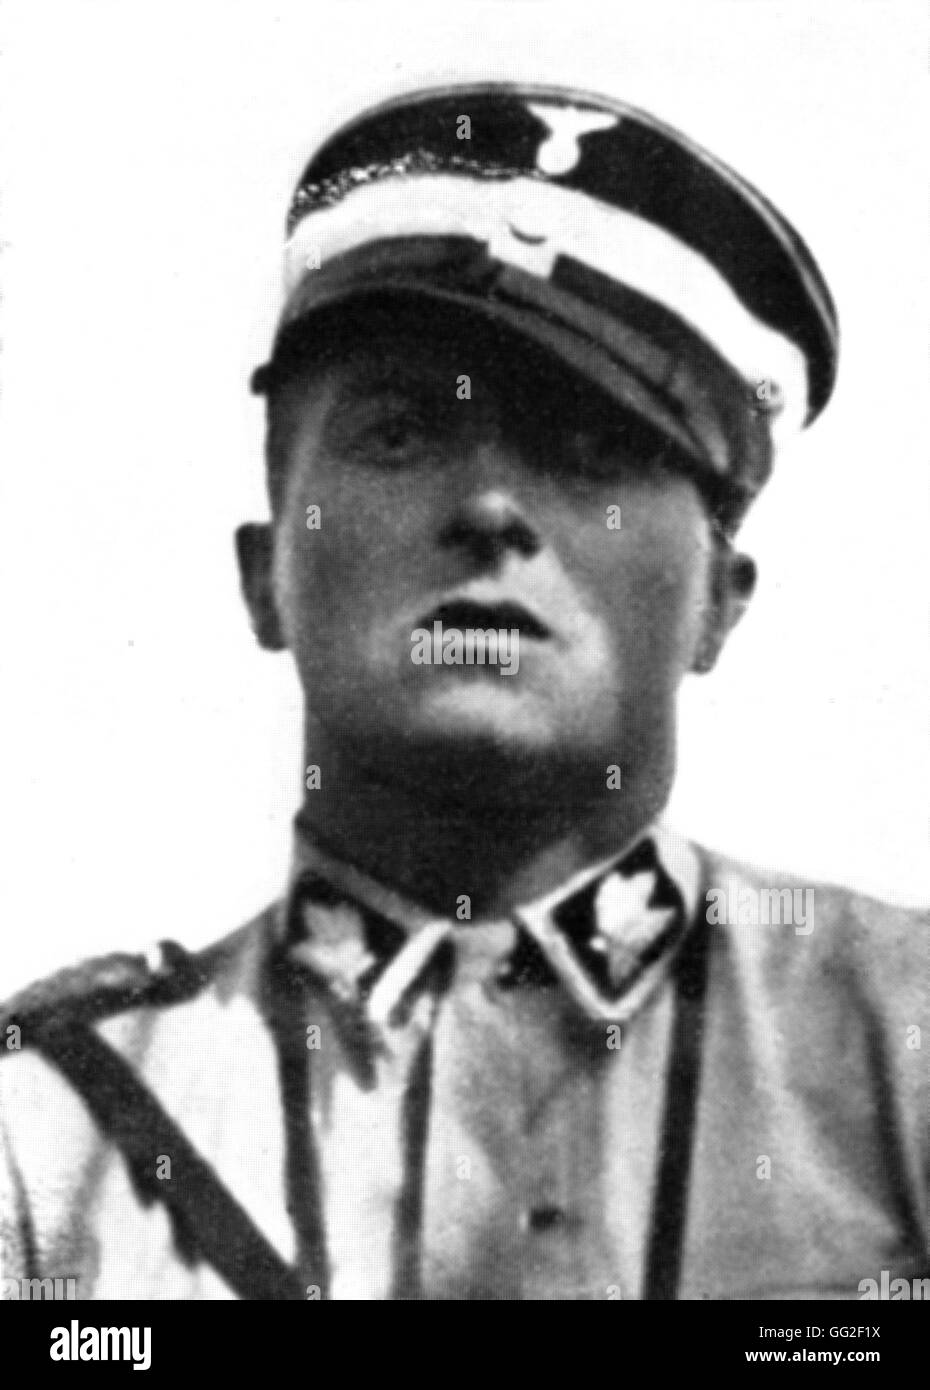 Karl Ernst, S.A. leader, assassinated on the Night of the Long Knives, June 30, 1934 20th century Germany Paris - BIDC Stock Photo